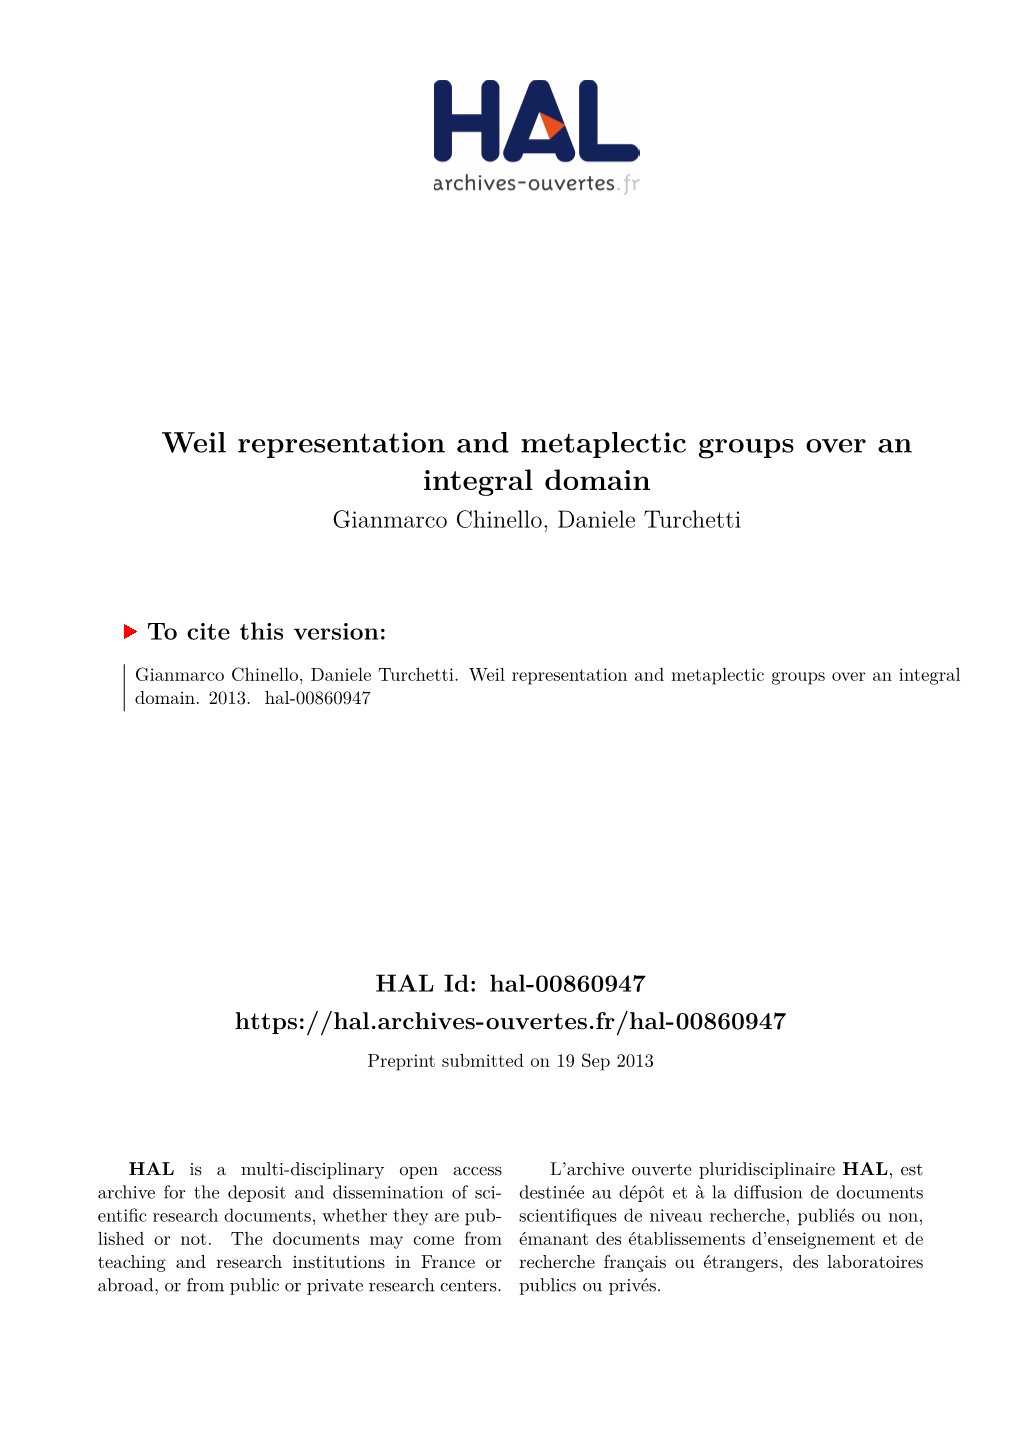 Weil Representation and Metaplectic Groups Over an Integral Domain Gianmarco Chinello, Daniele Turchetti